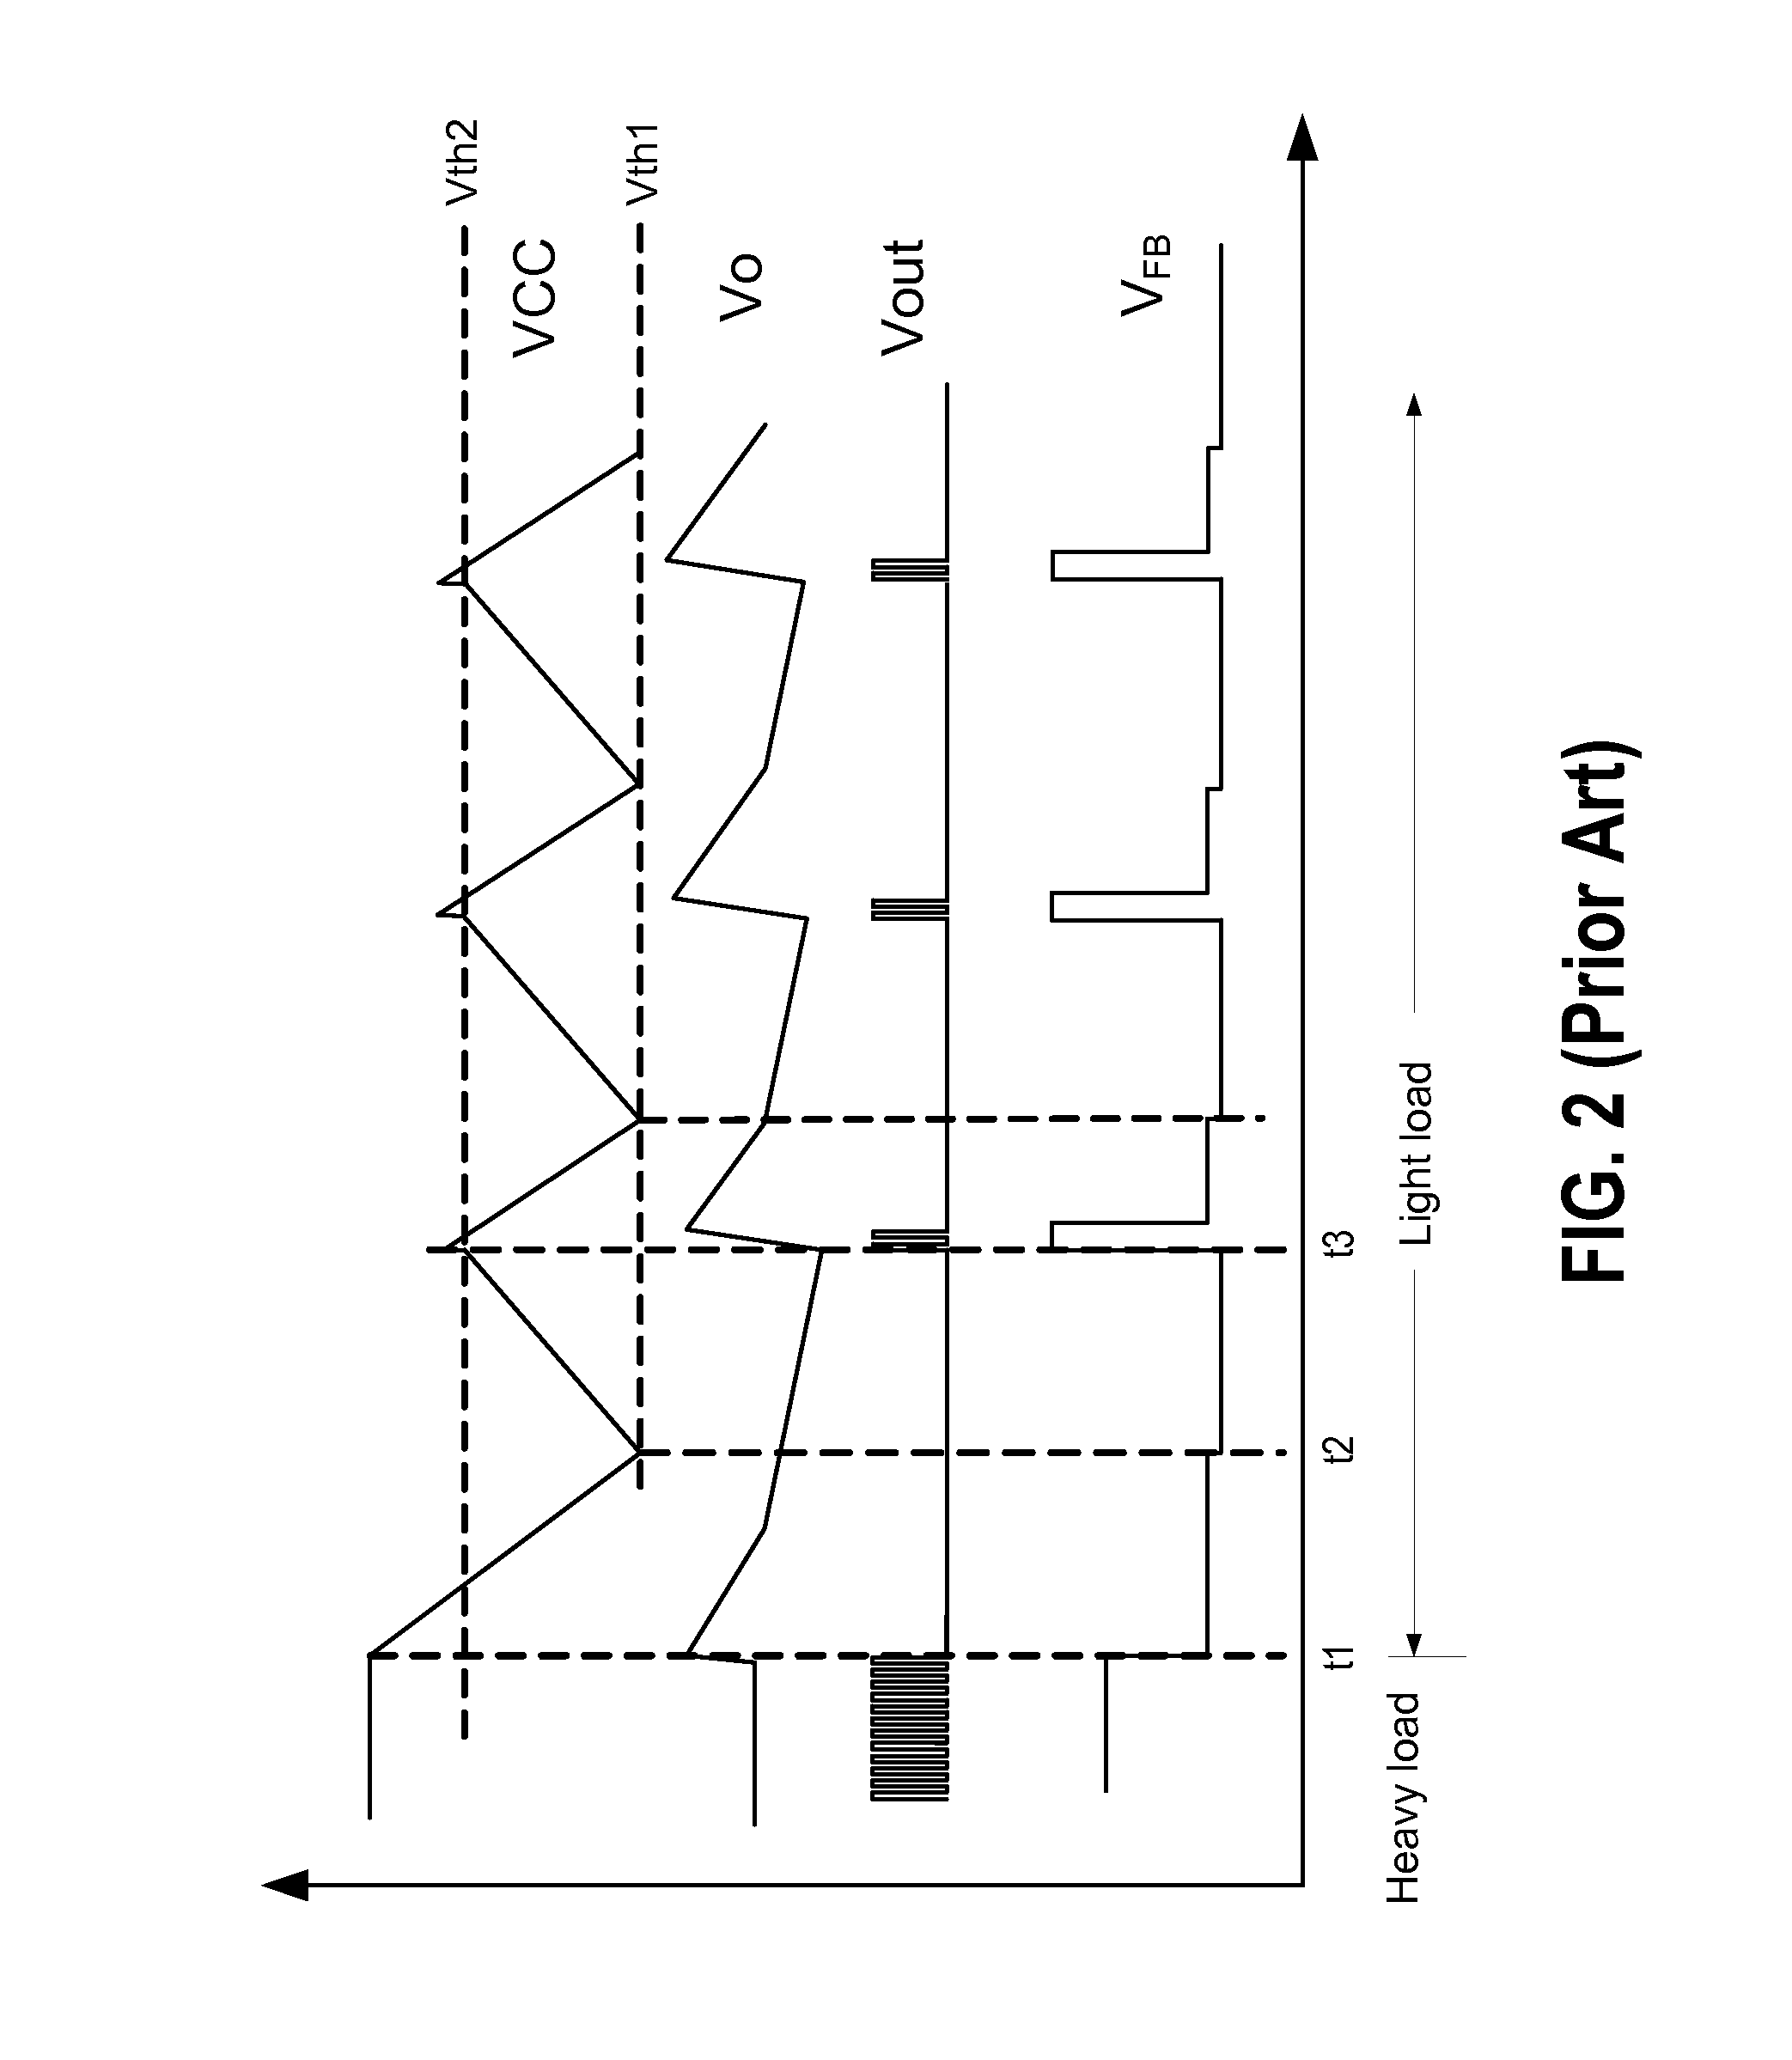 Method and apparatus for controlling a switching mode power supply during transition of load conditions to minimize instability